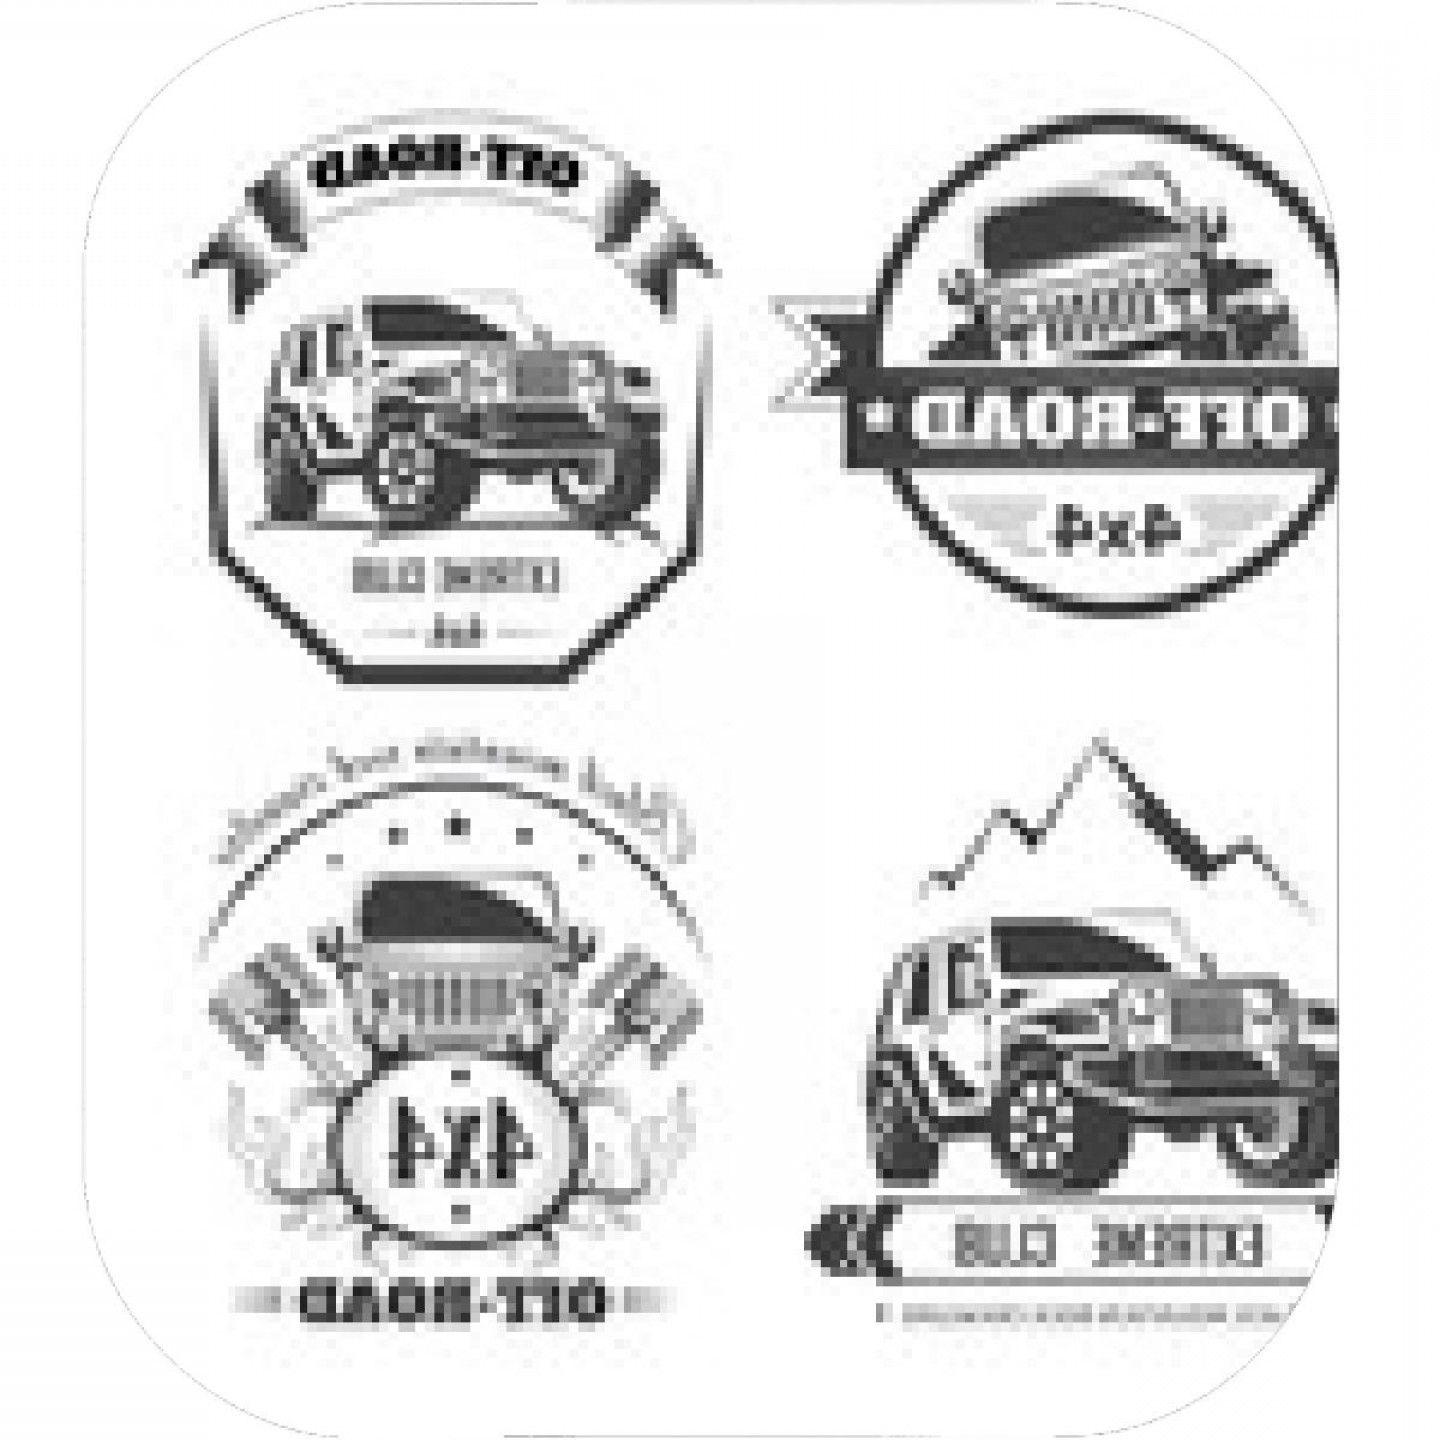 SUV Emblems Logo - Suv Car Vector Emblems Labels And Logos Offroad Extreme Expedition X ...